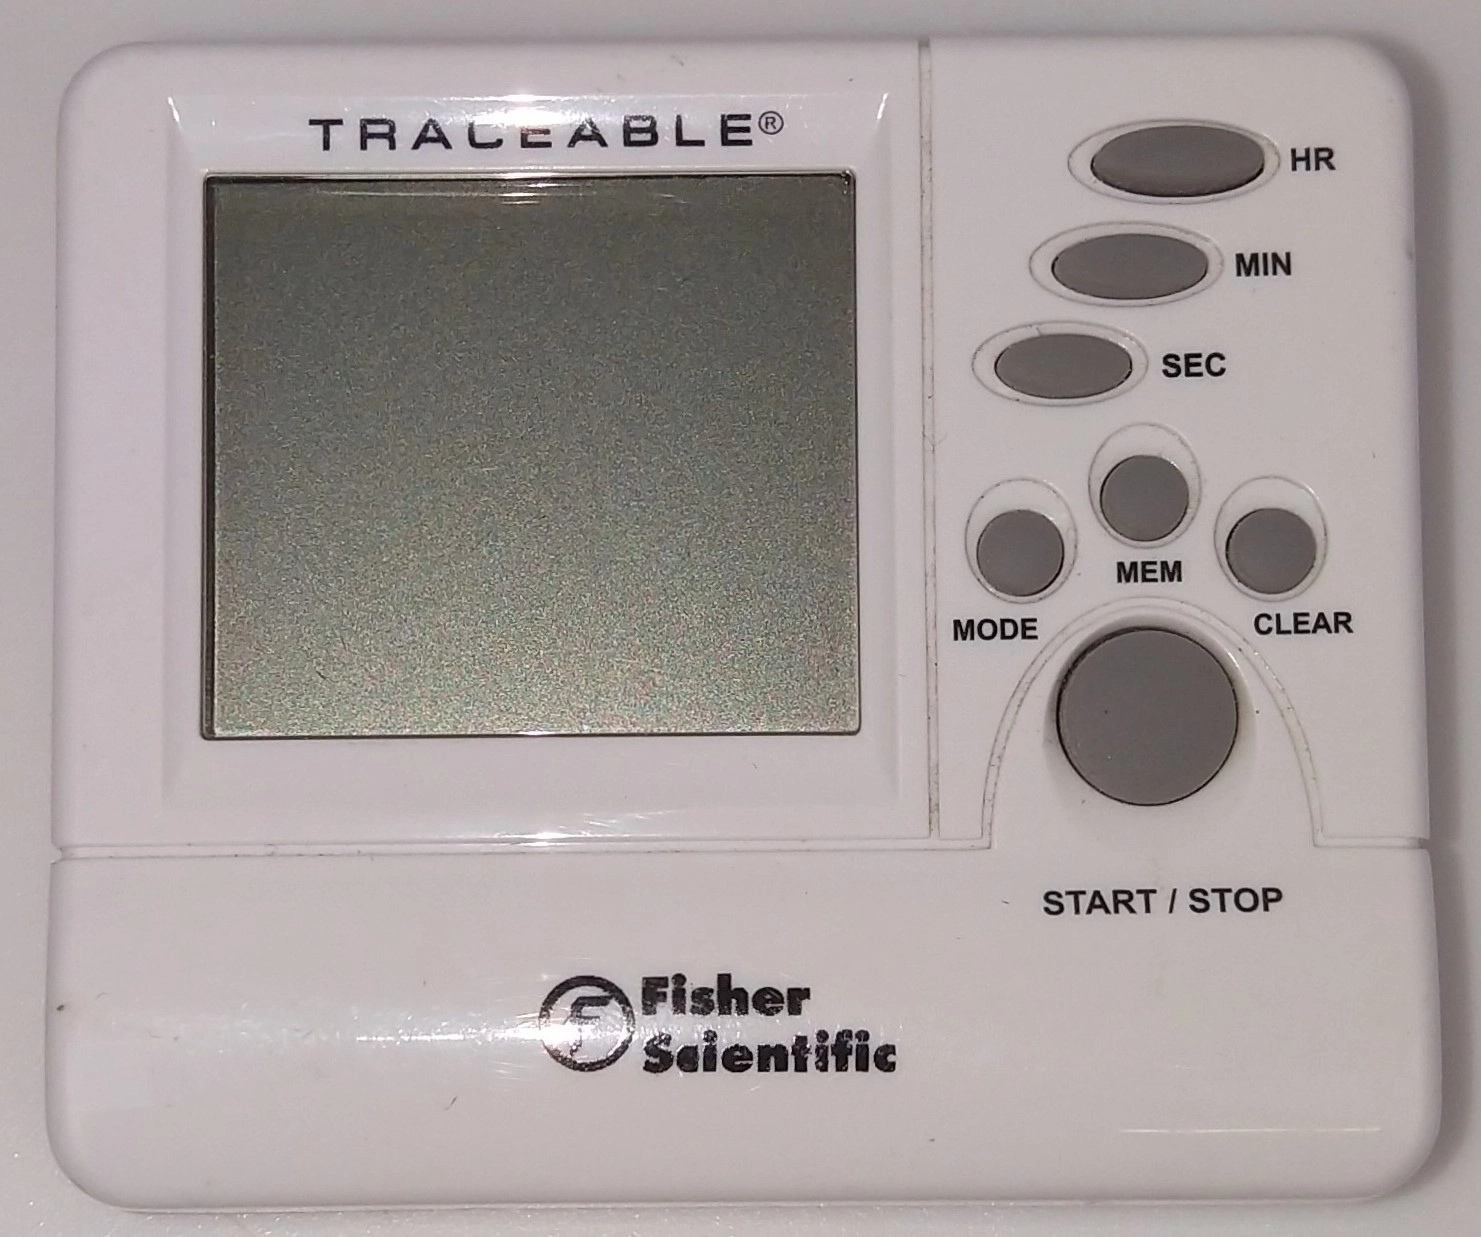 Fisher Traceable 02-401-8 Double Display Digital Timer